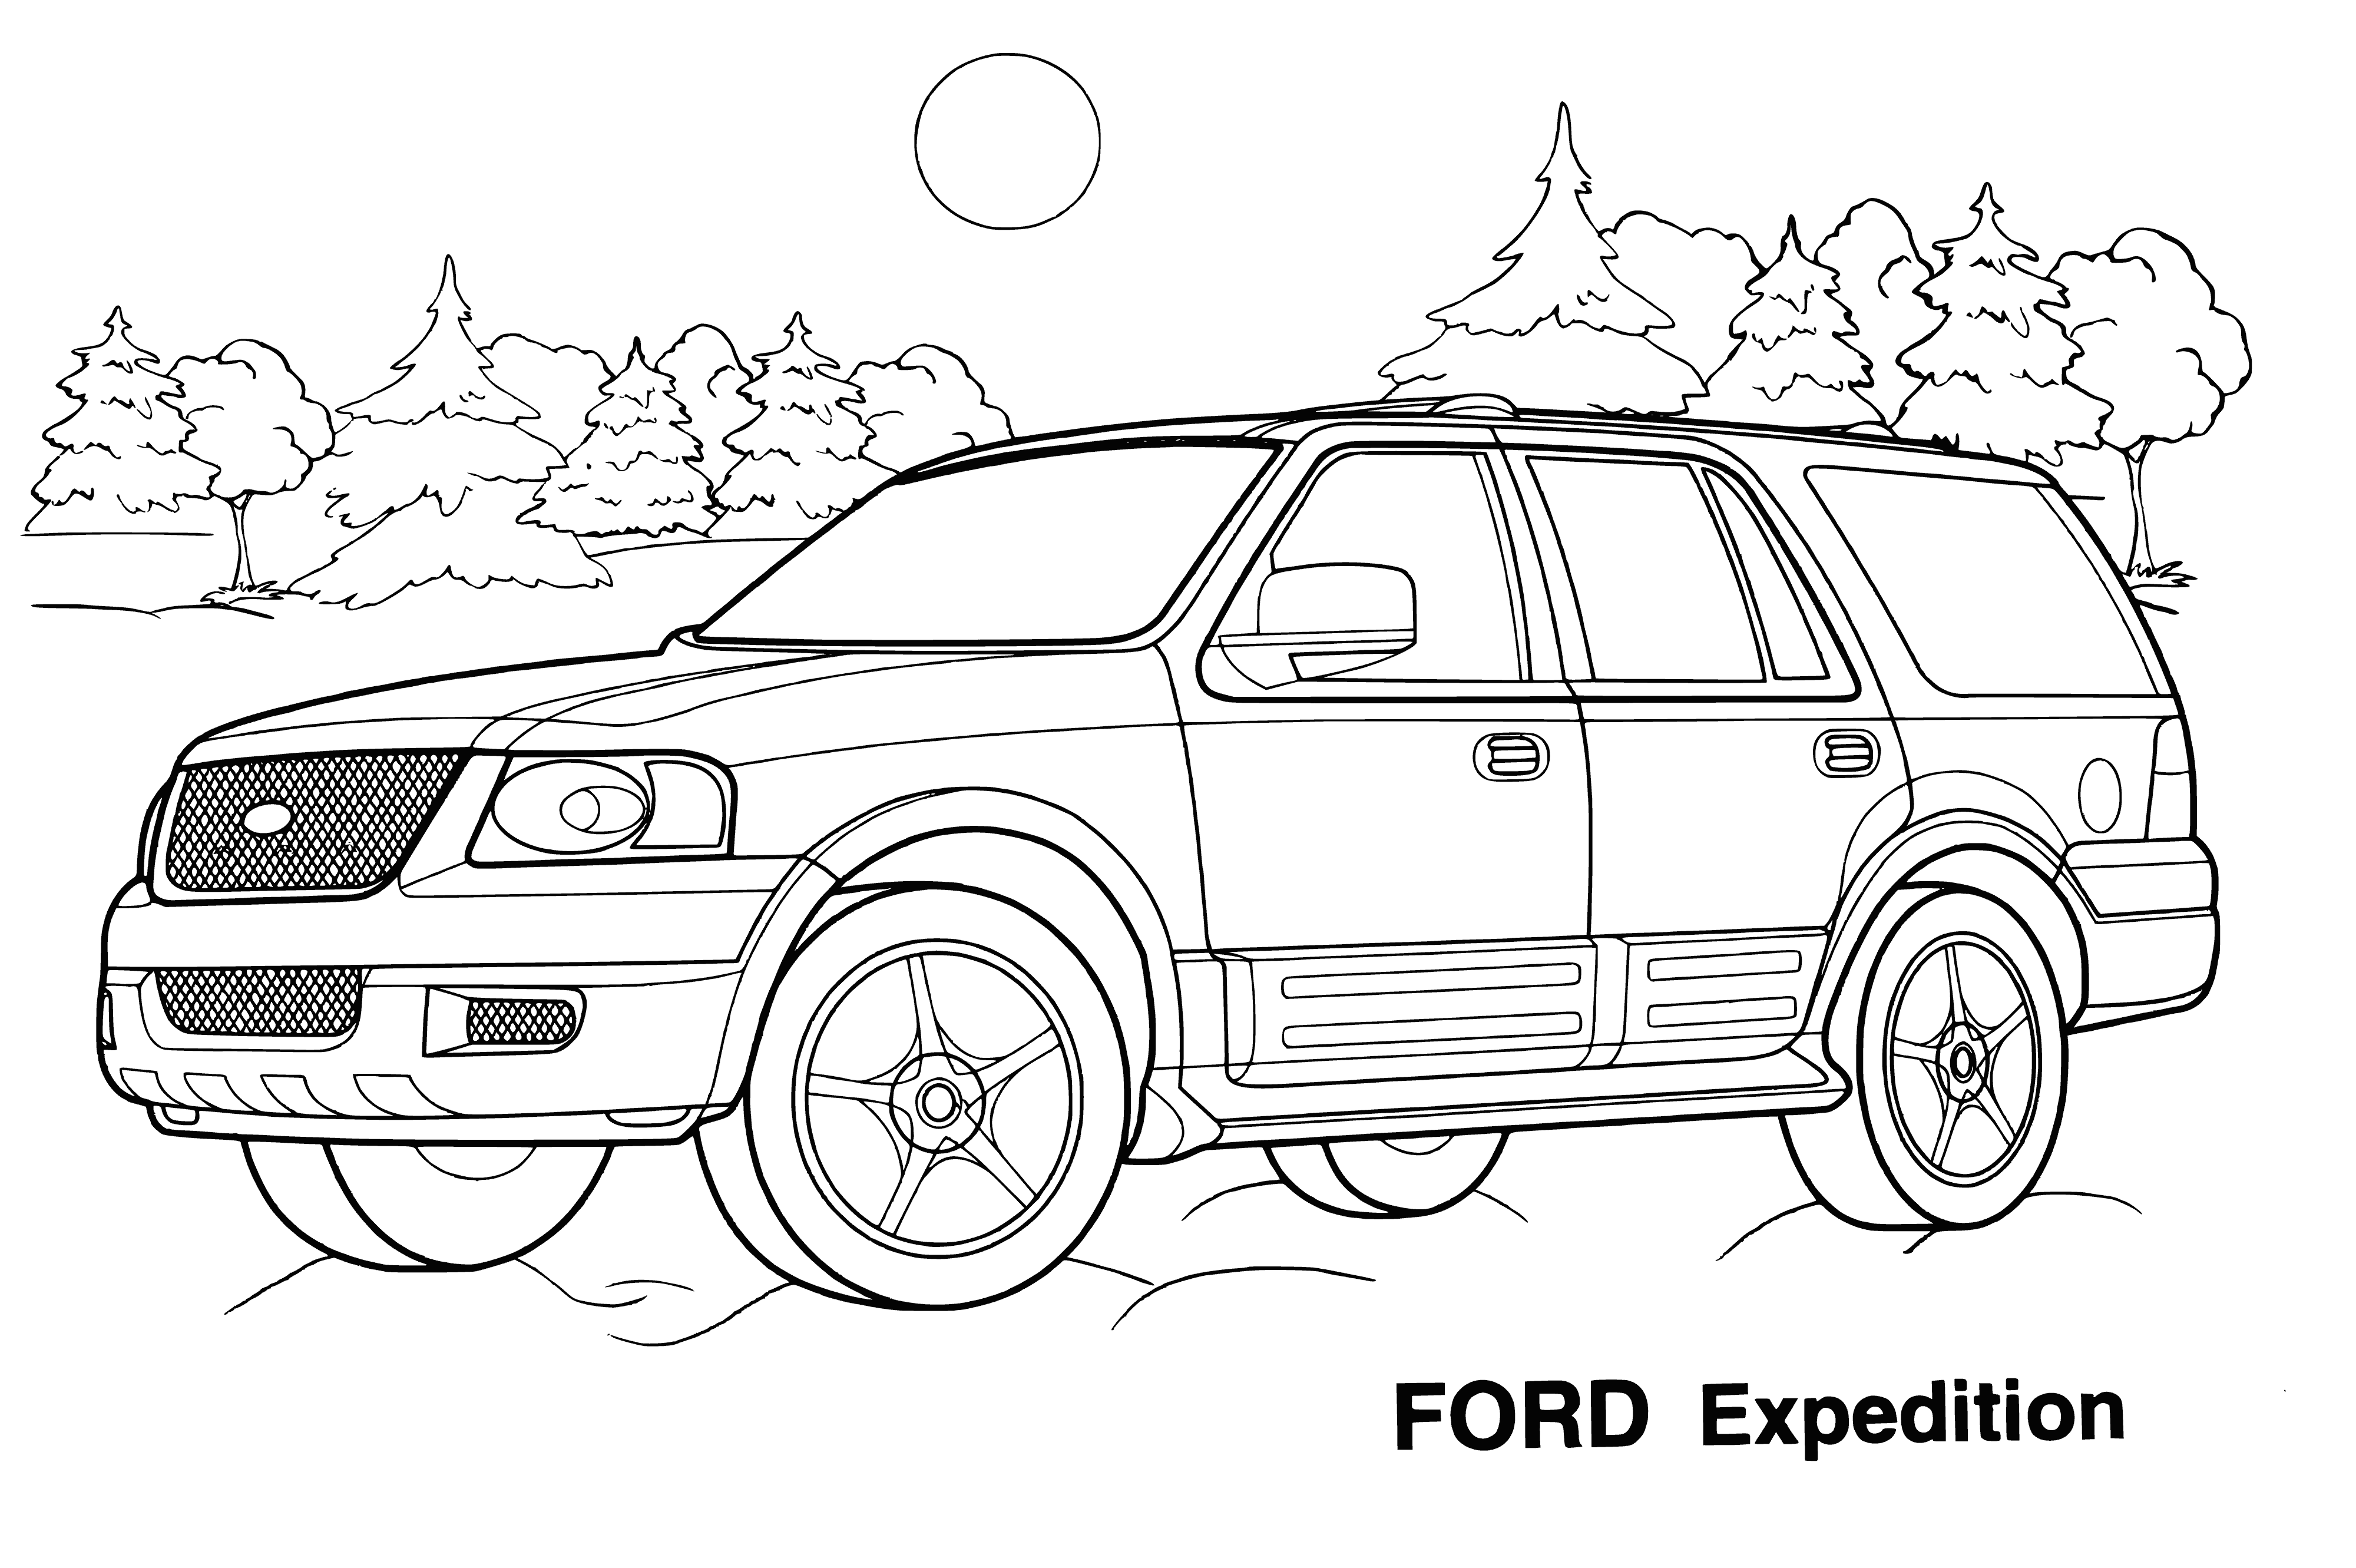 coloring page: 3 jeeps in coloring page, different colors. Two facing same way, one other way. Doors open on all.